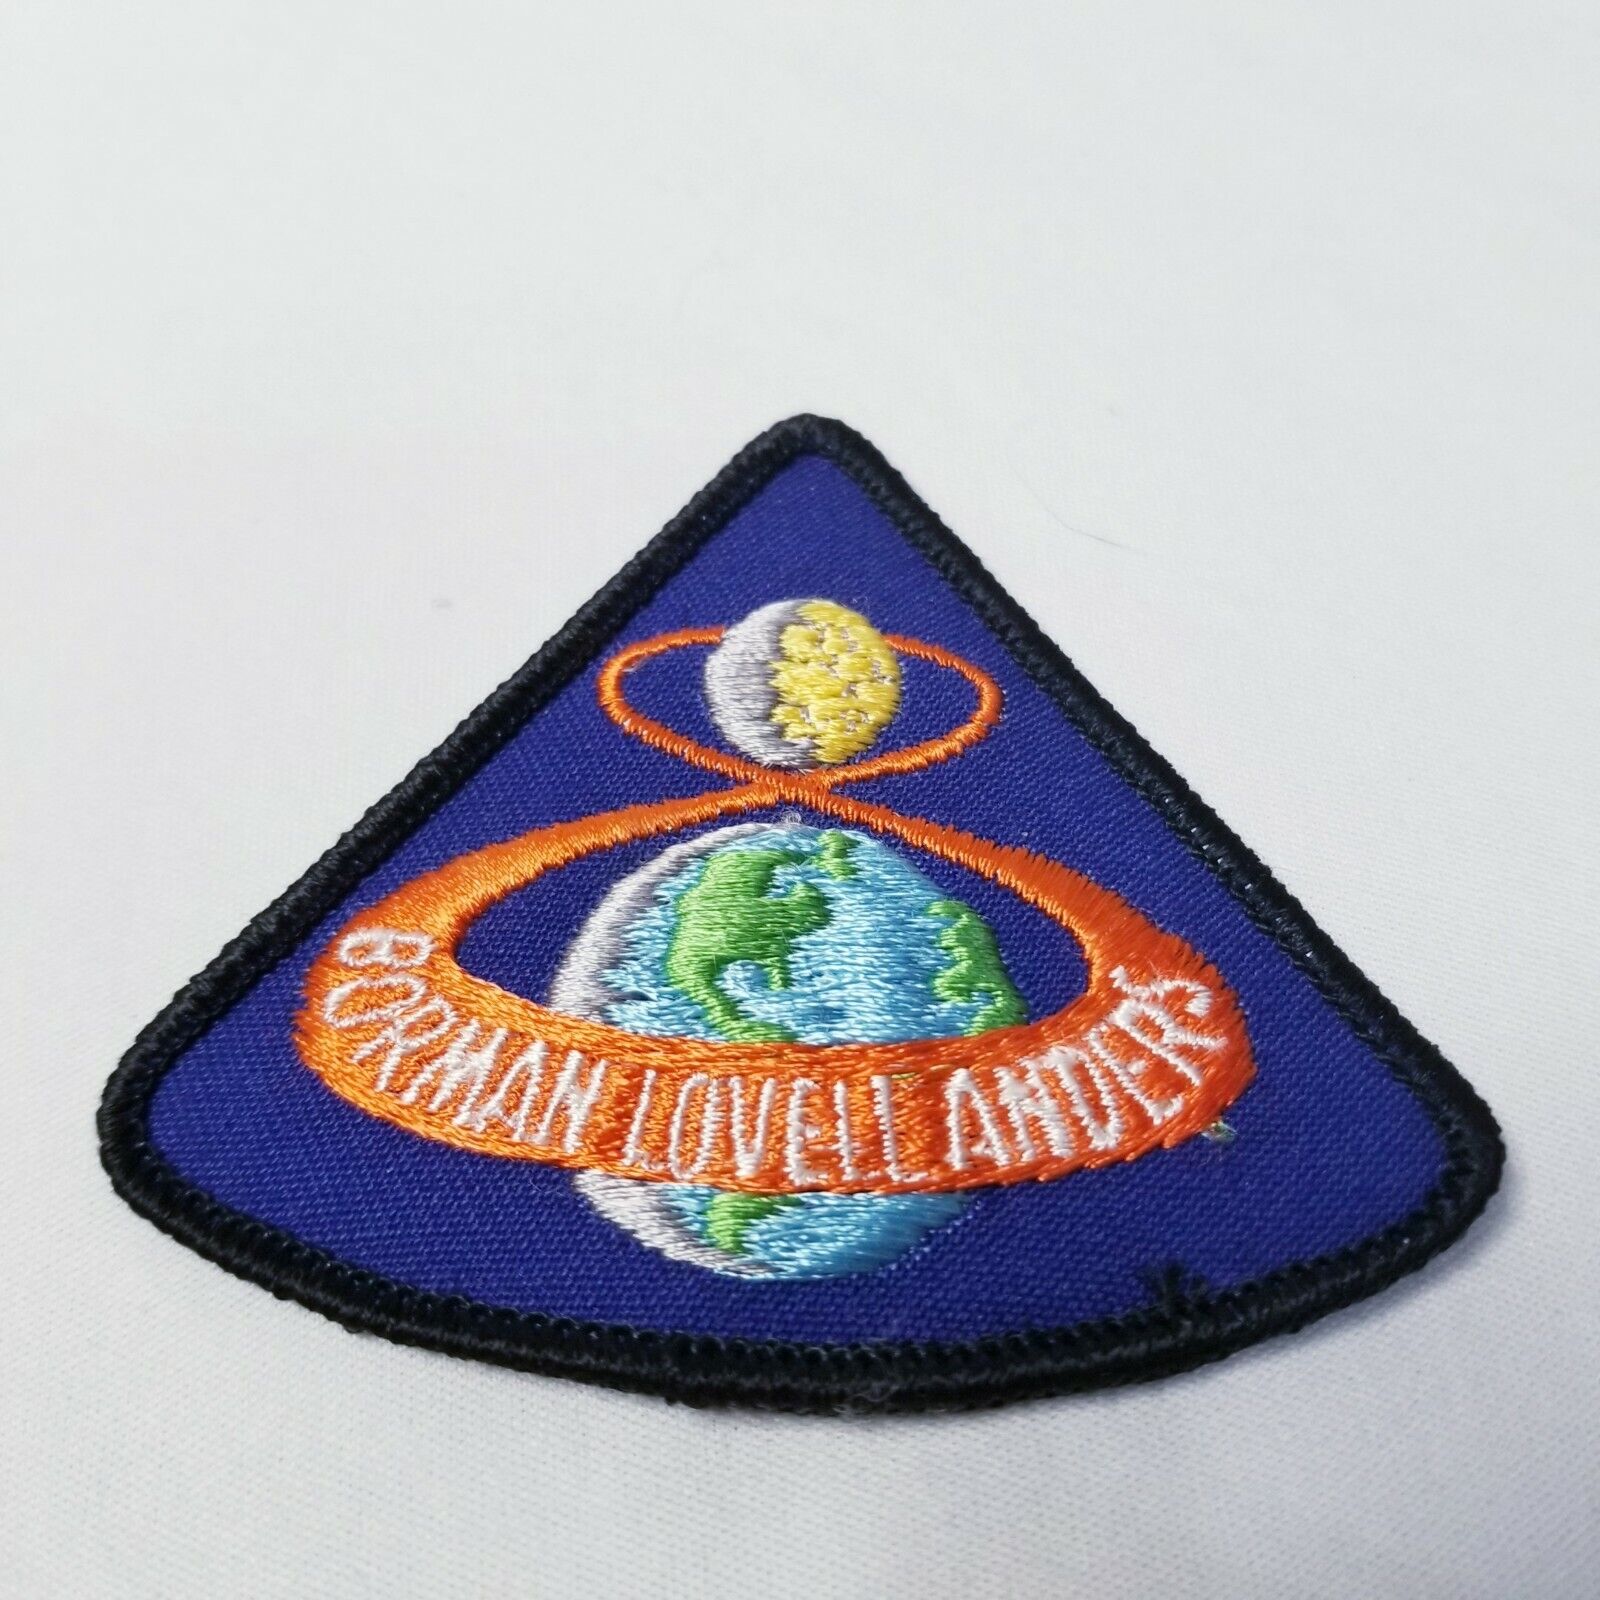 Vintage 1968 Apollo NASA Space Patch  - Borman Lovell Anders 3” Embroidered 